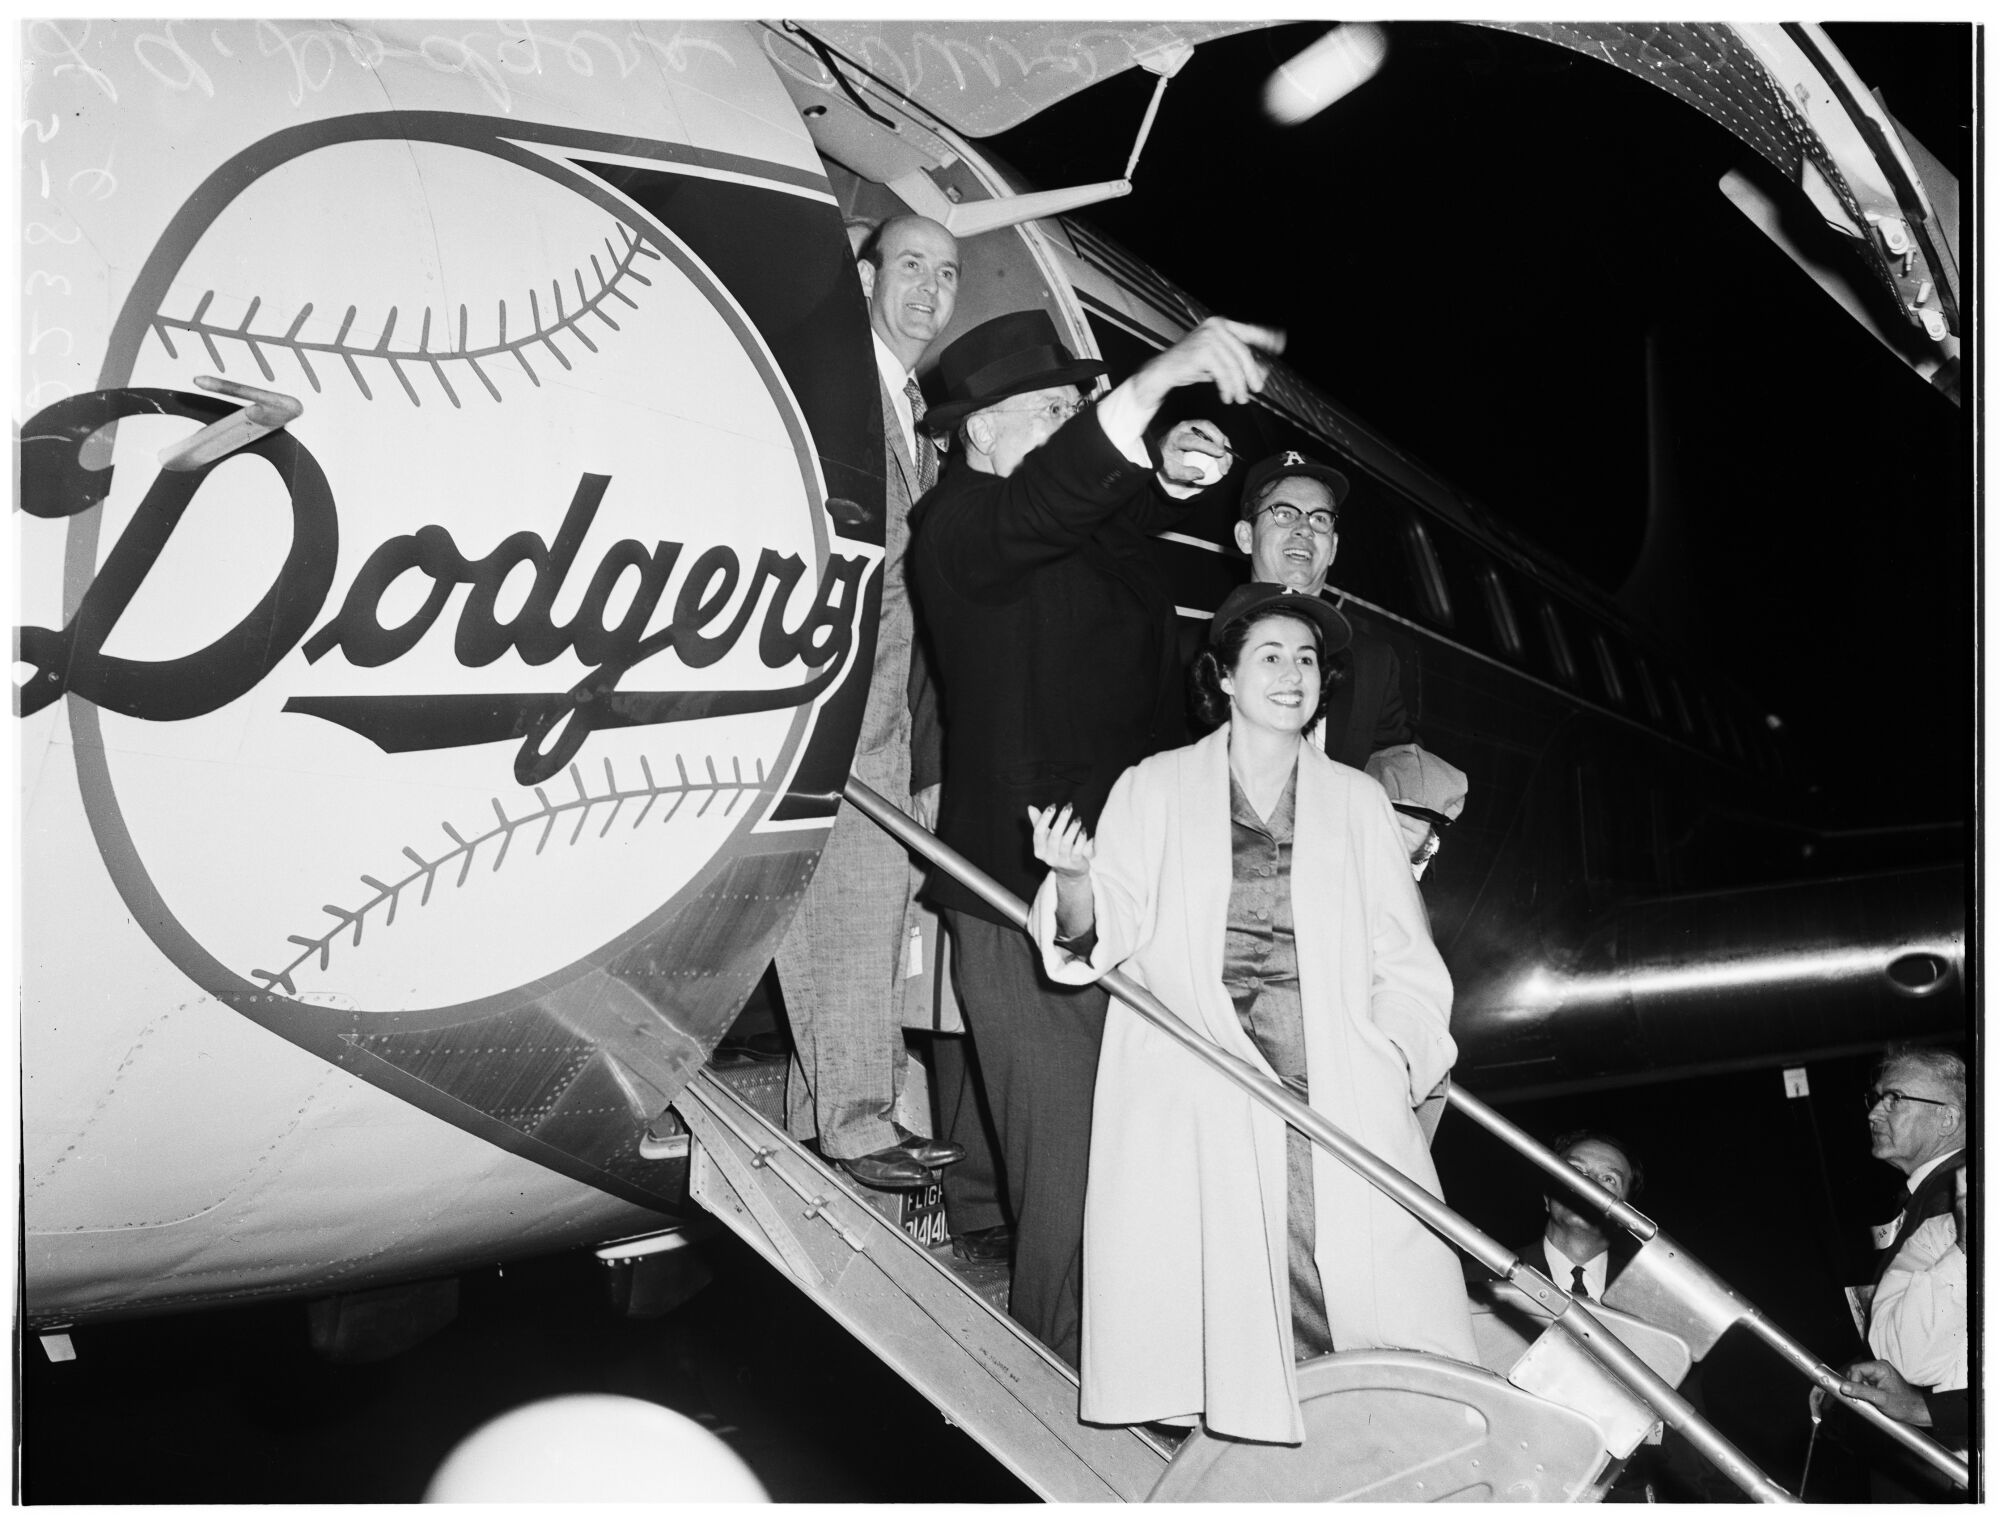 Dodgers. Walter O'Malley throwing out baseball from plane, steps of plane upon arriving to L.A in 1958.